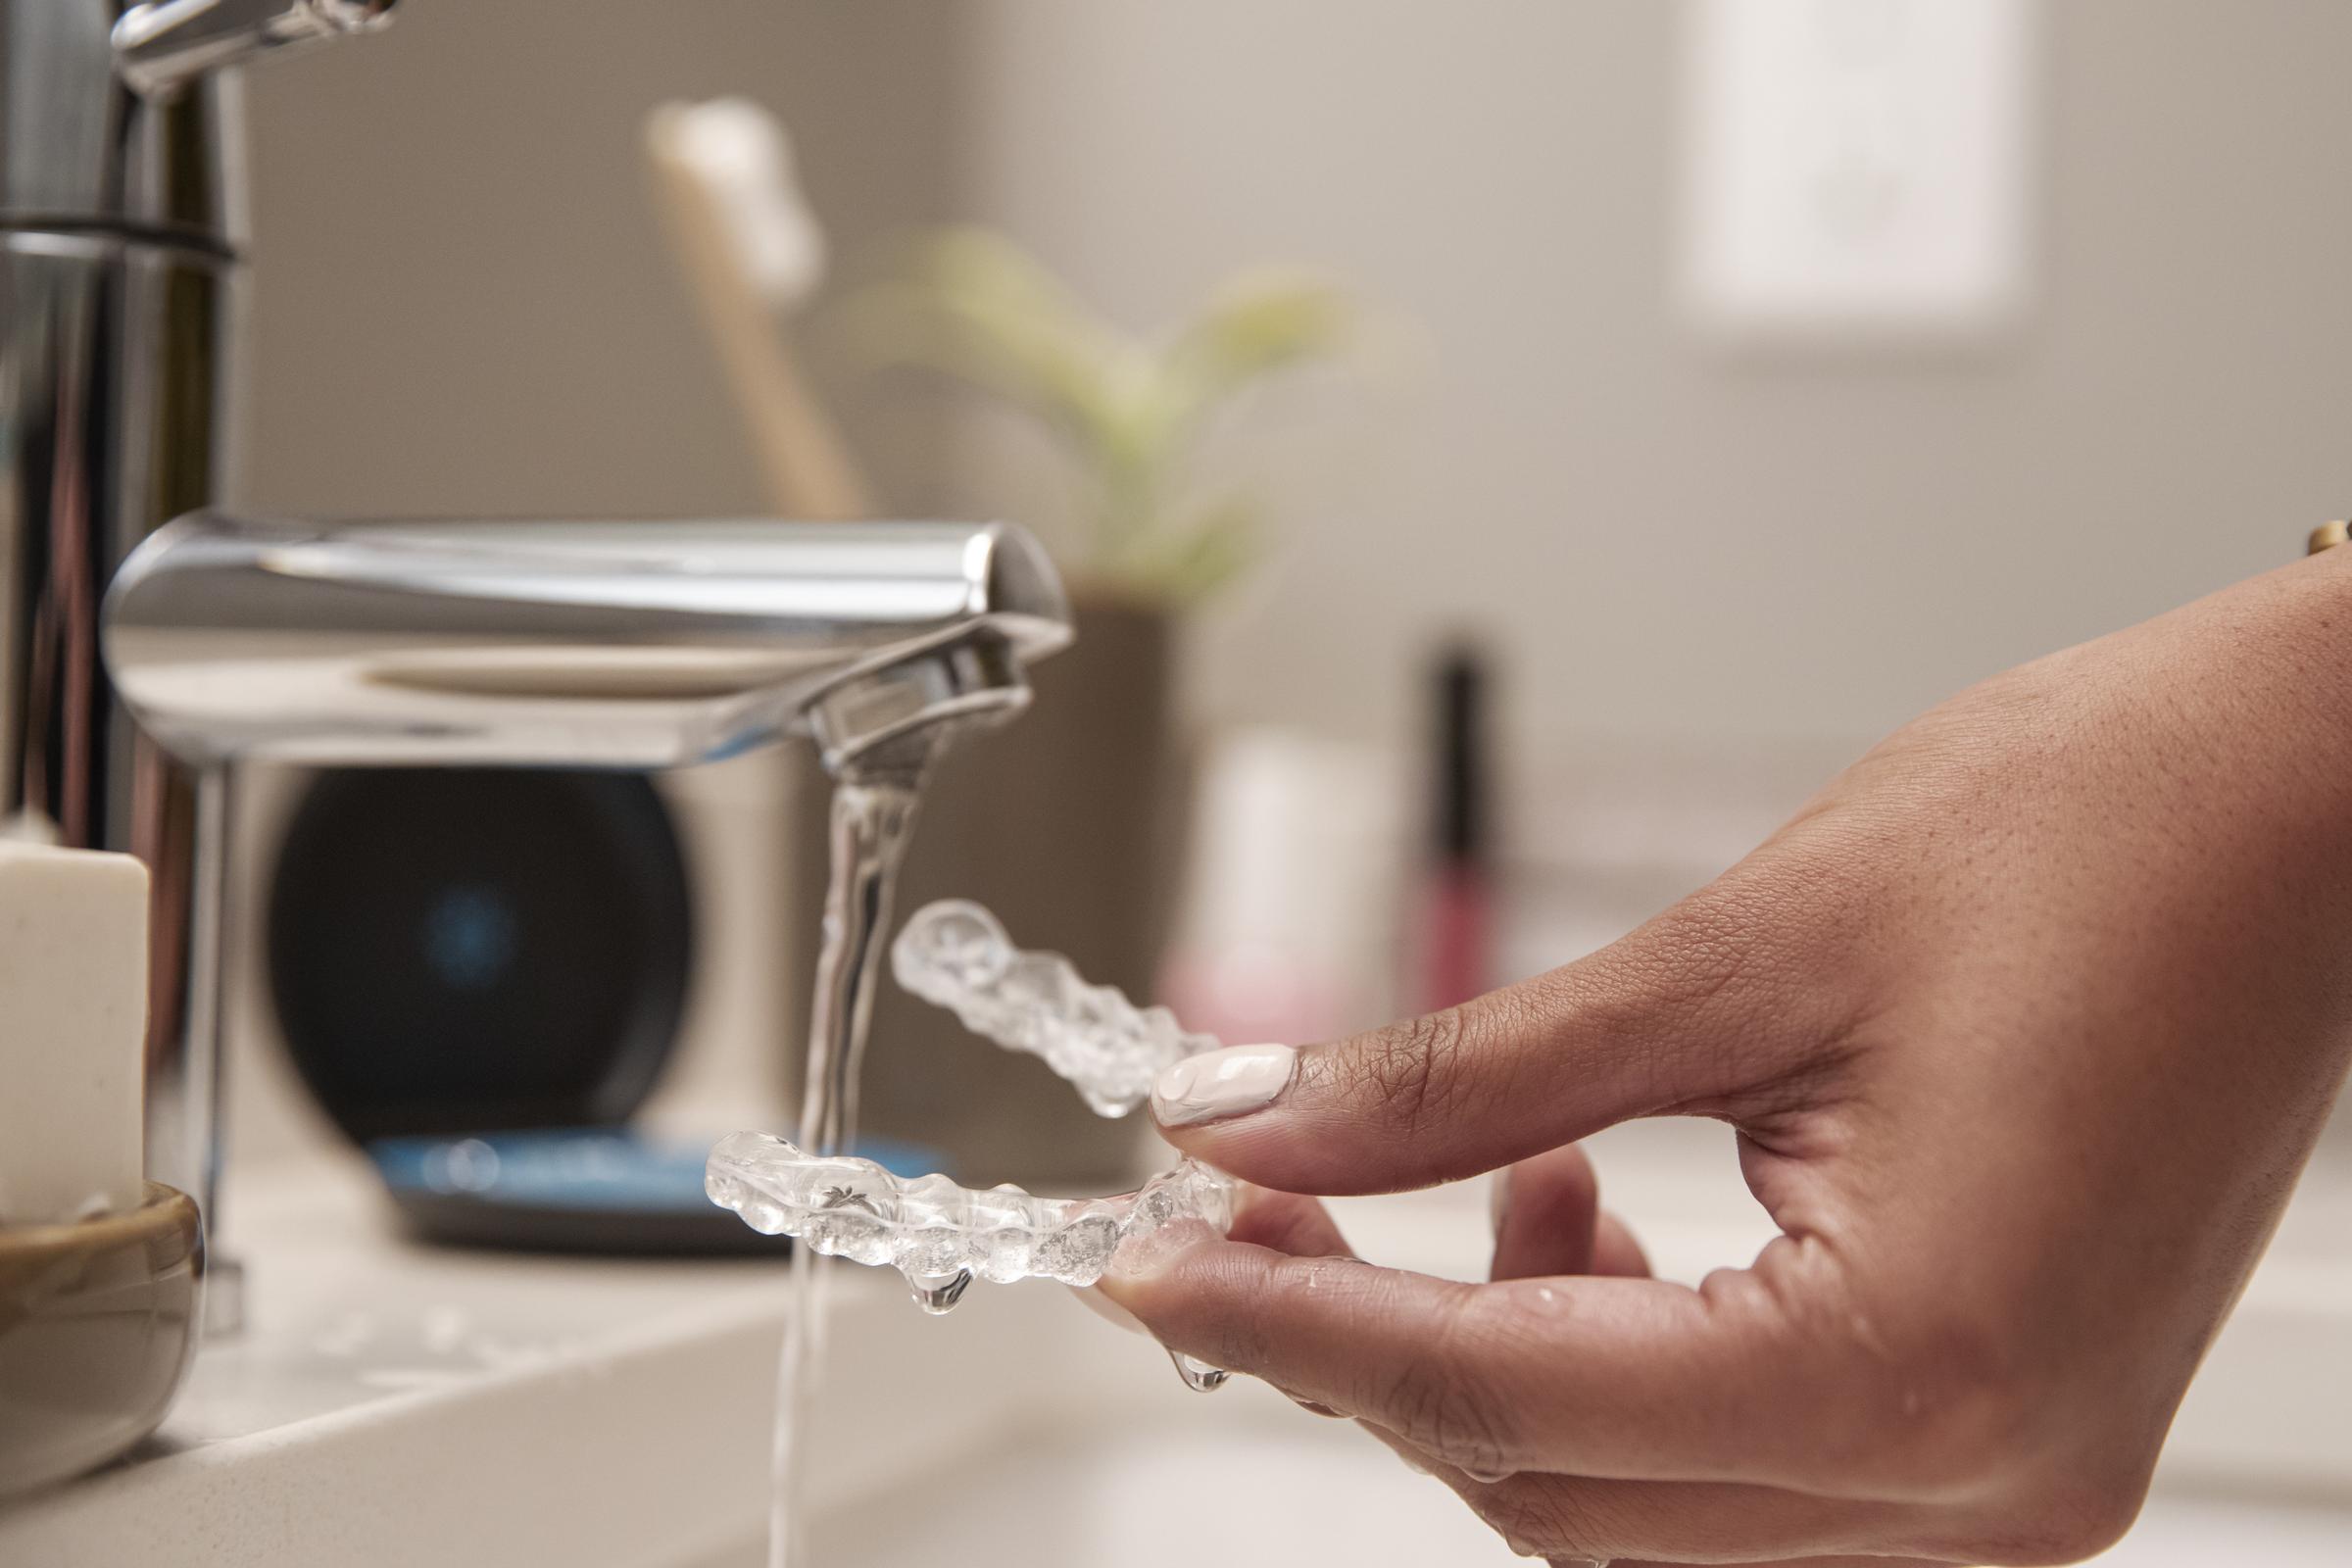 Shot of a hand holding aligners while washing them